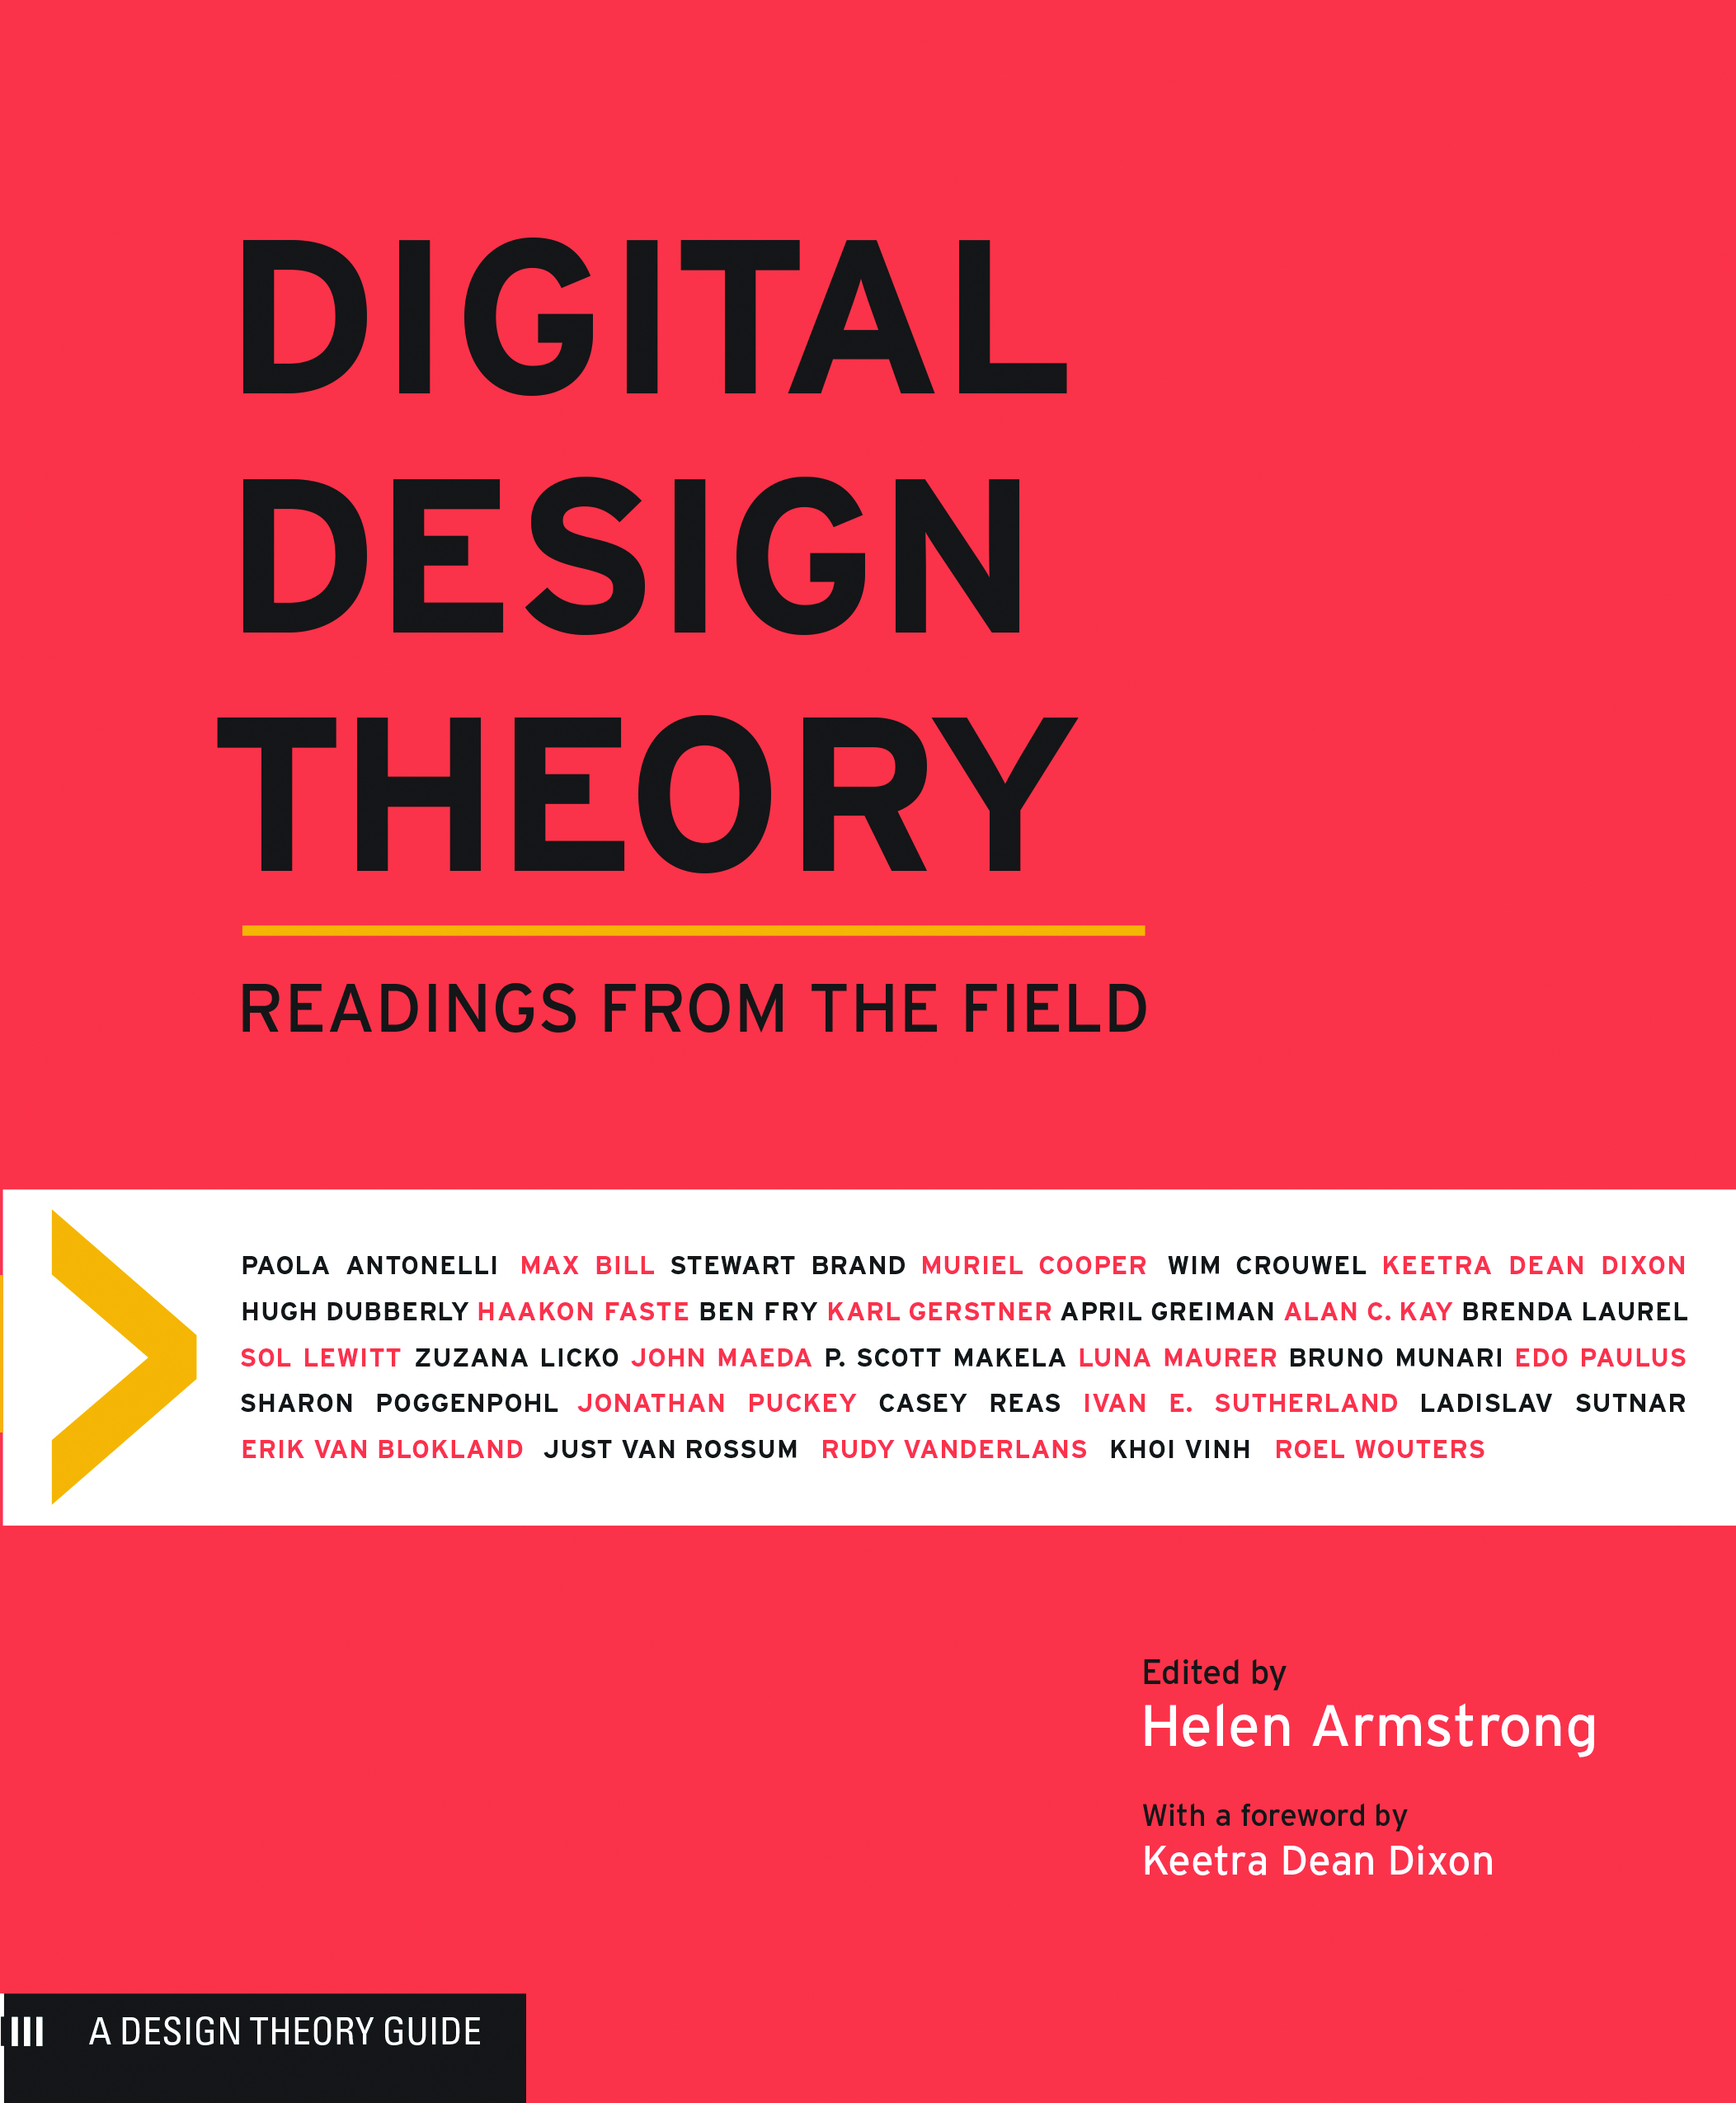 Digital design theory readings from the field